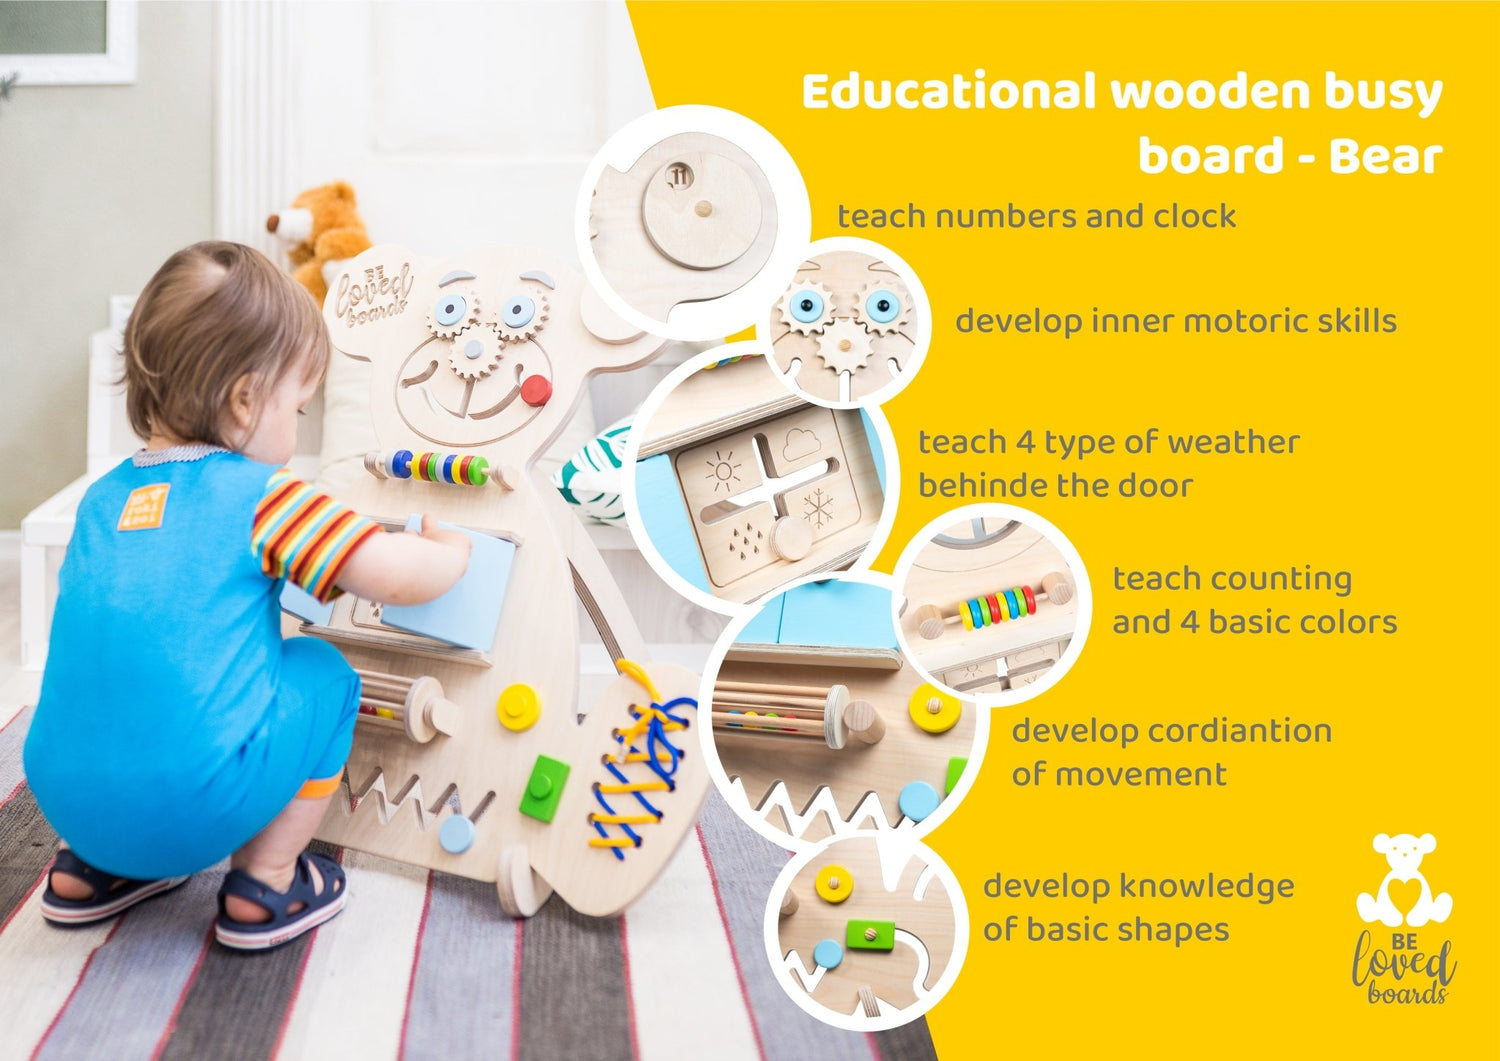 What is a busy board? - Beloved boards